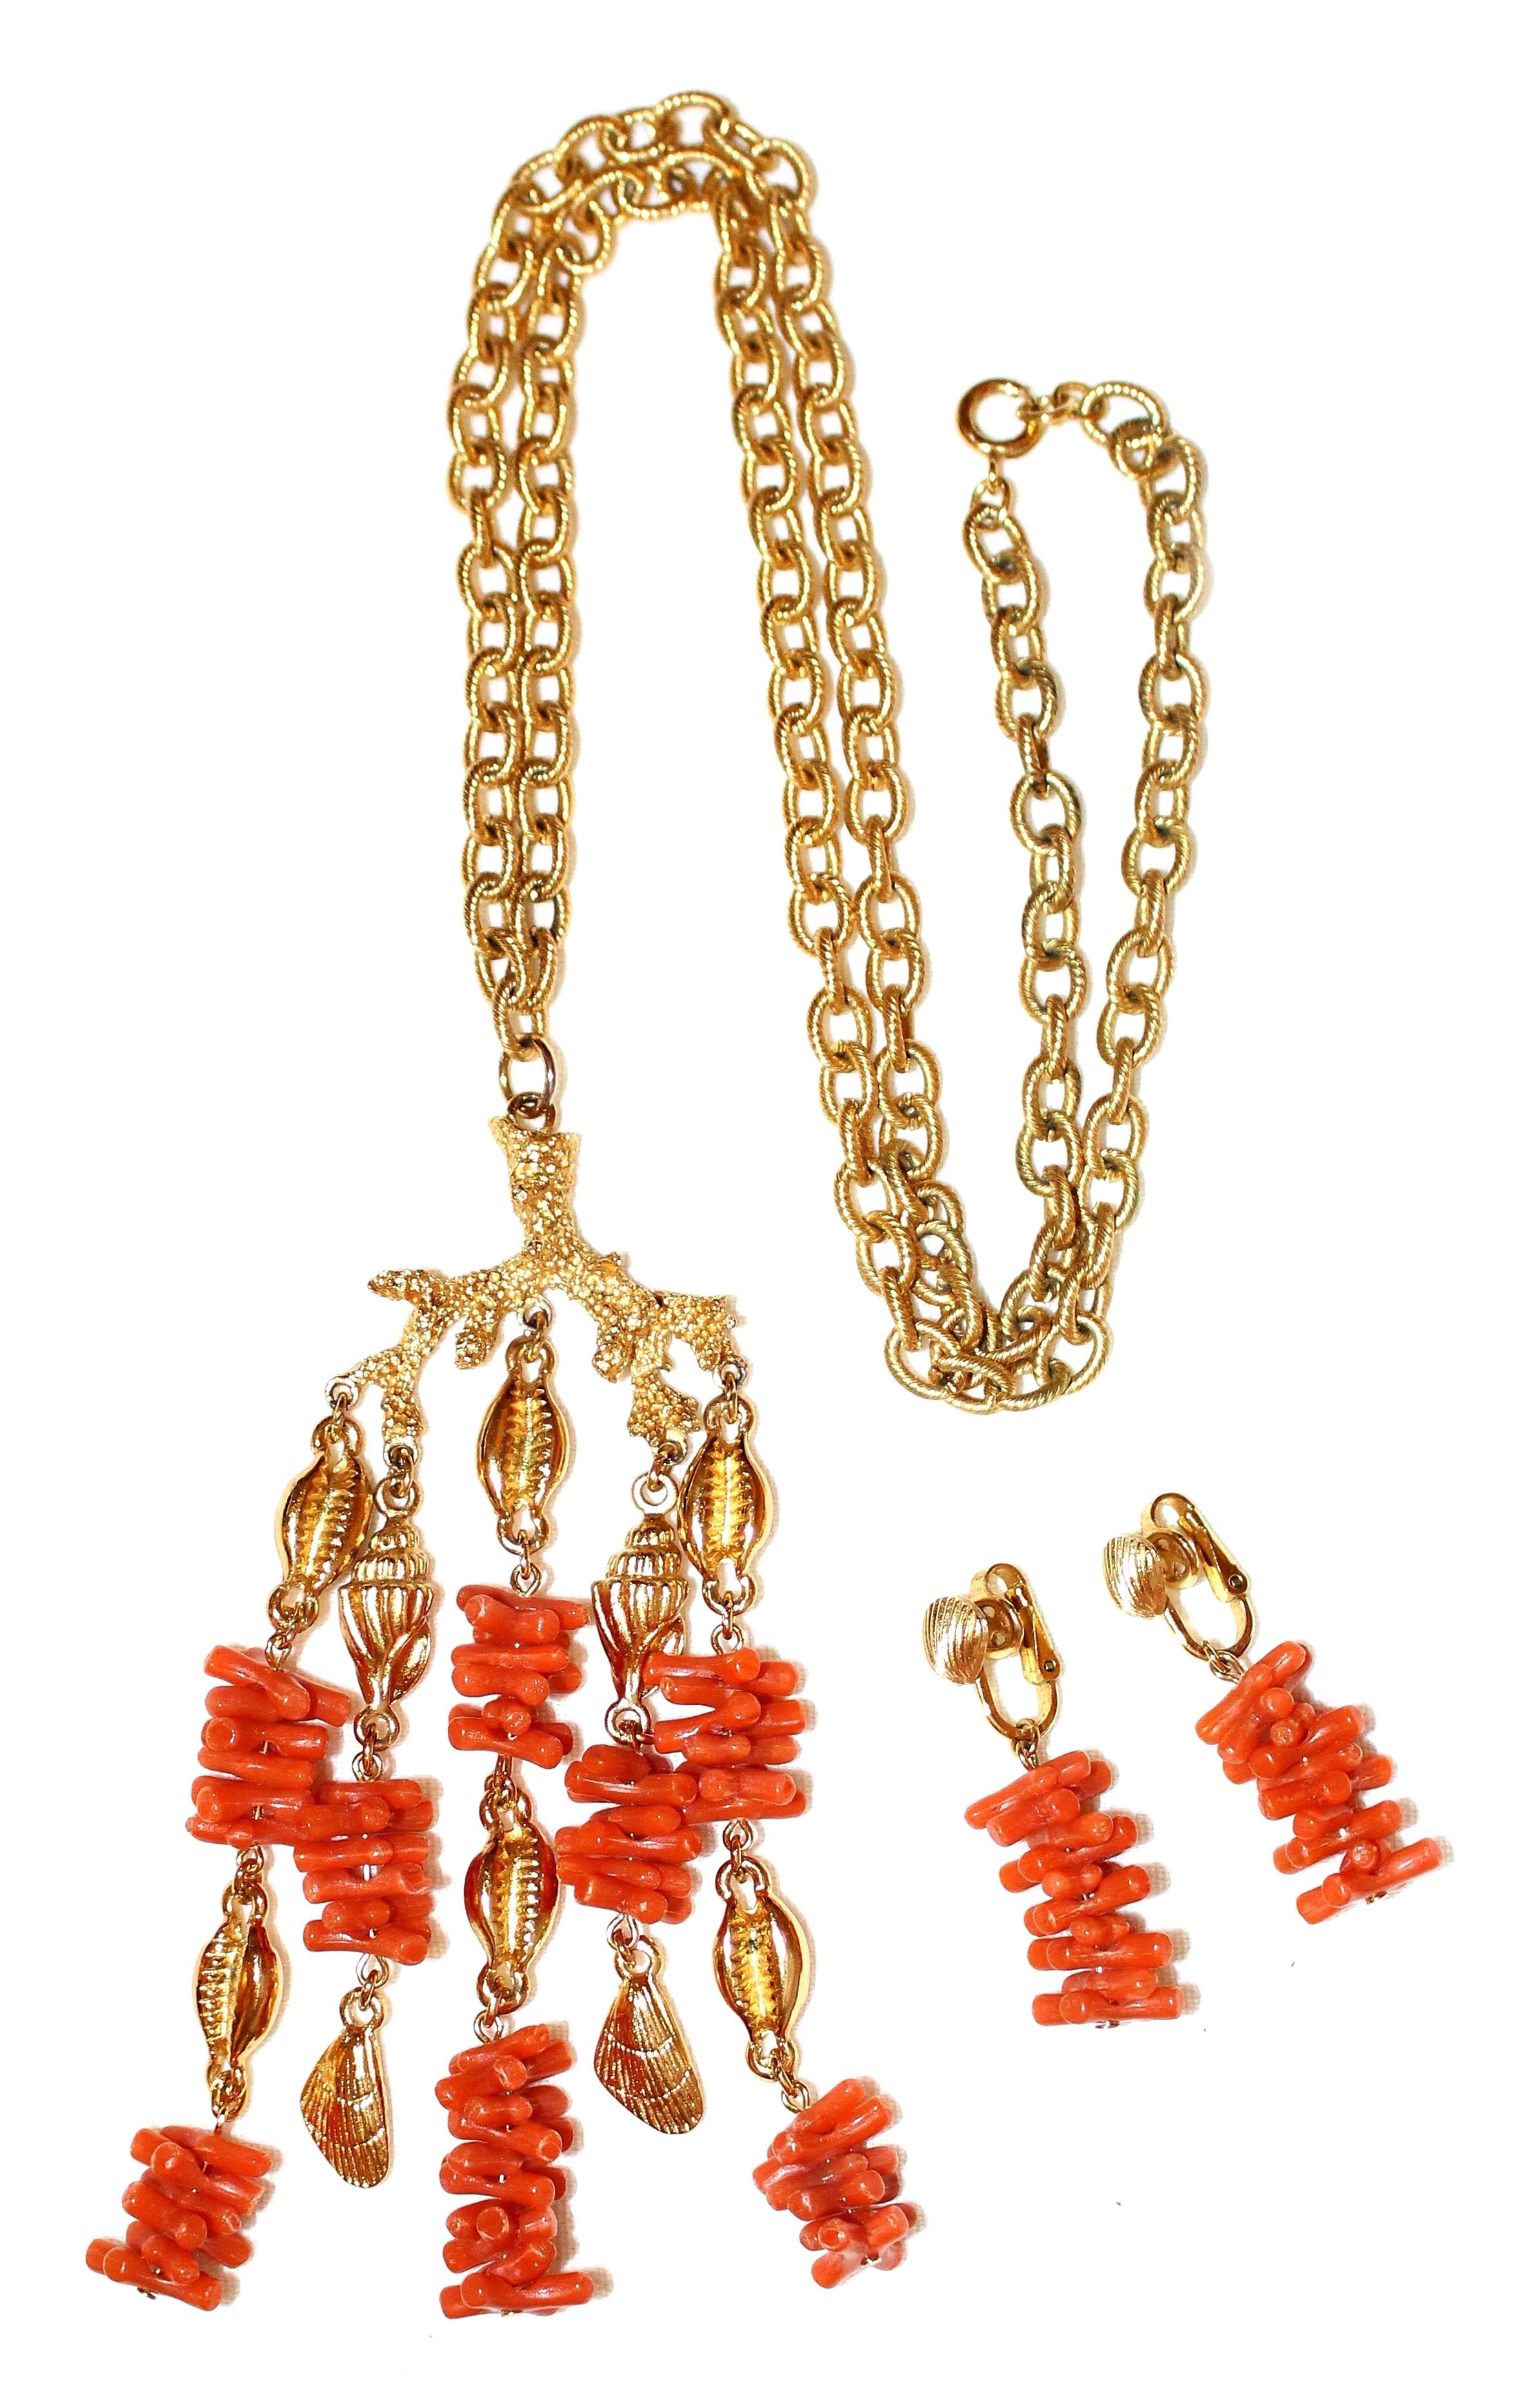  Circa 1950s to 1960s Trifari gold tone metal chain necklace with a large dangling pendant embellished with gold tone shells and faux branch coral. The matching clip back earrings measure 1.75